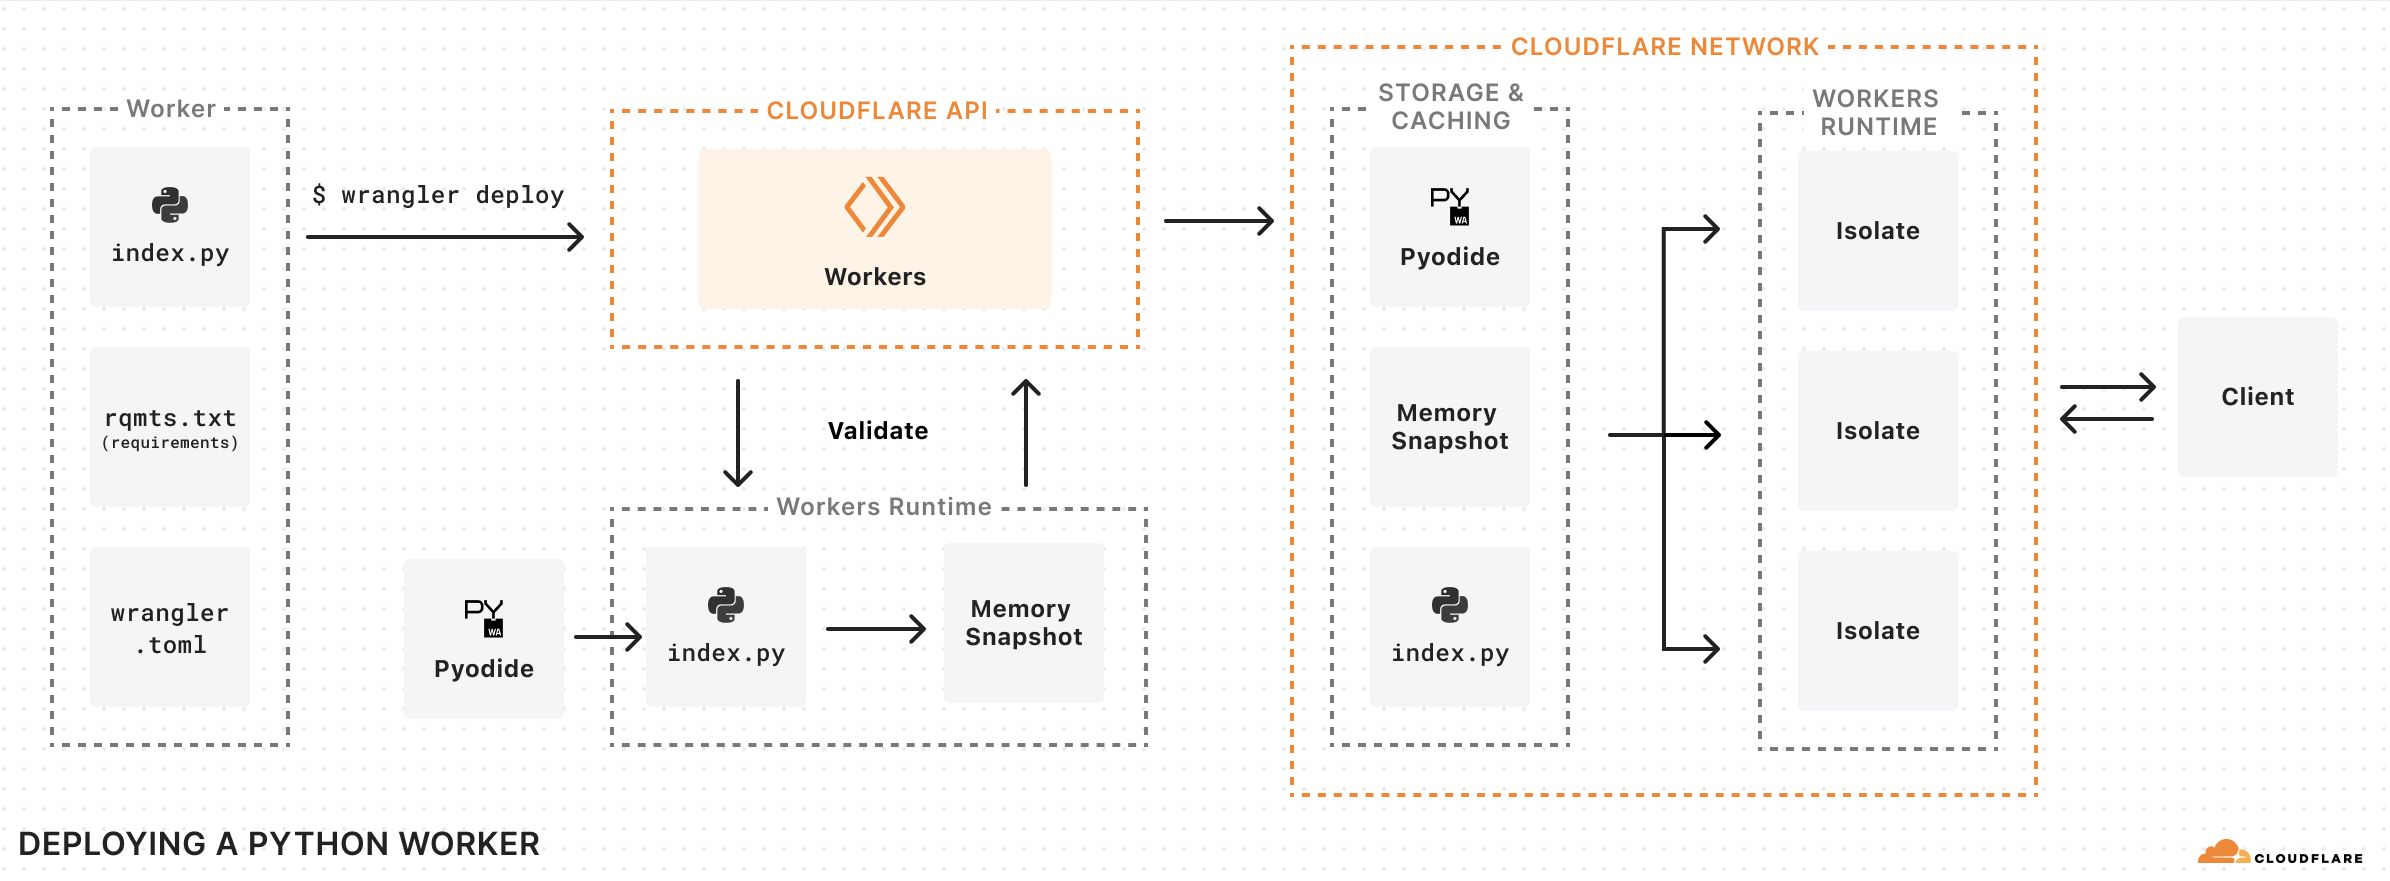 Diagram of how Python Workers are deployed to Cloudflare